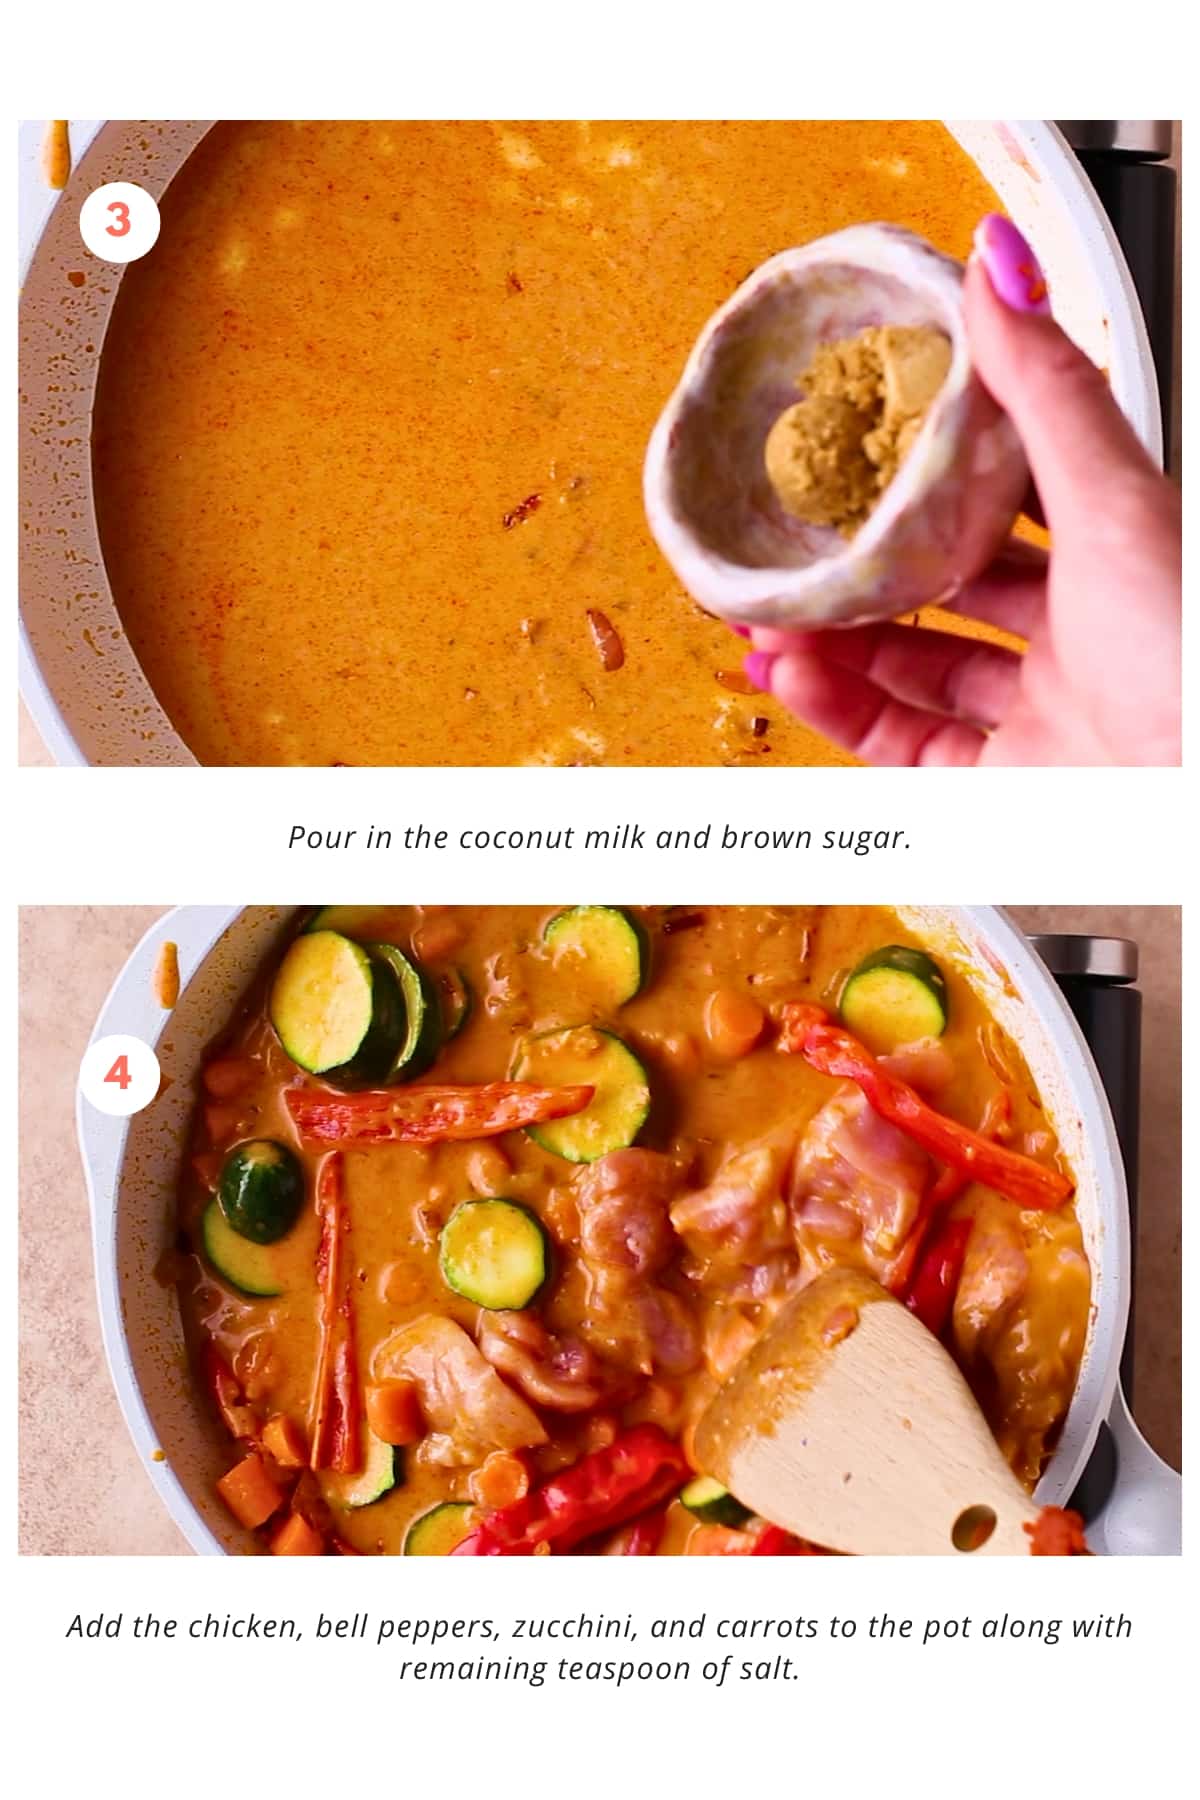 The coconut milk and brown sugar are poured in. Then the chicken, bell peppers, zucchini, and carrots are added to the pot along with the remaining teaspoon of salt.